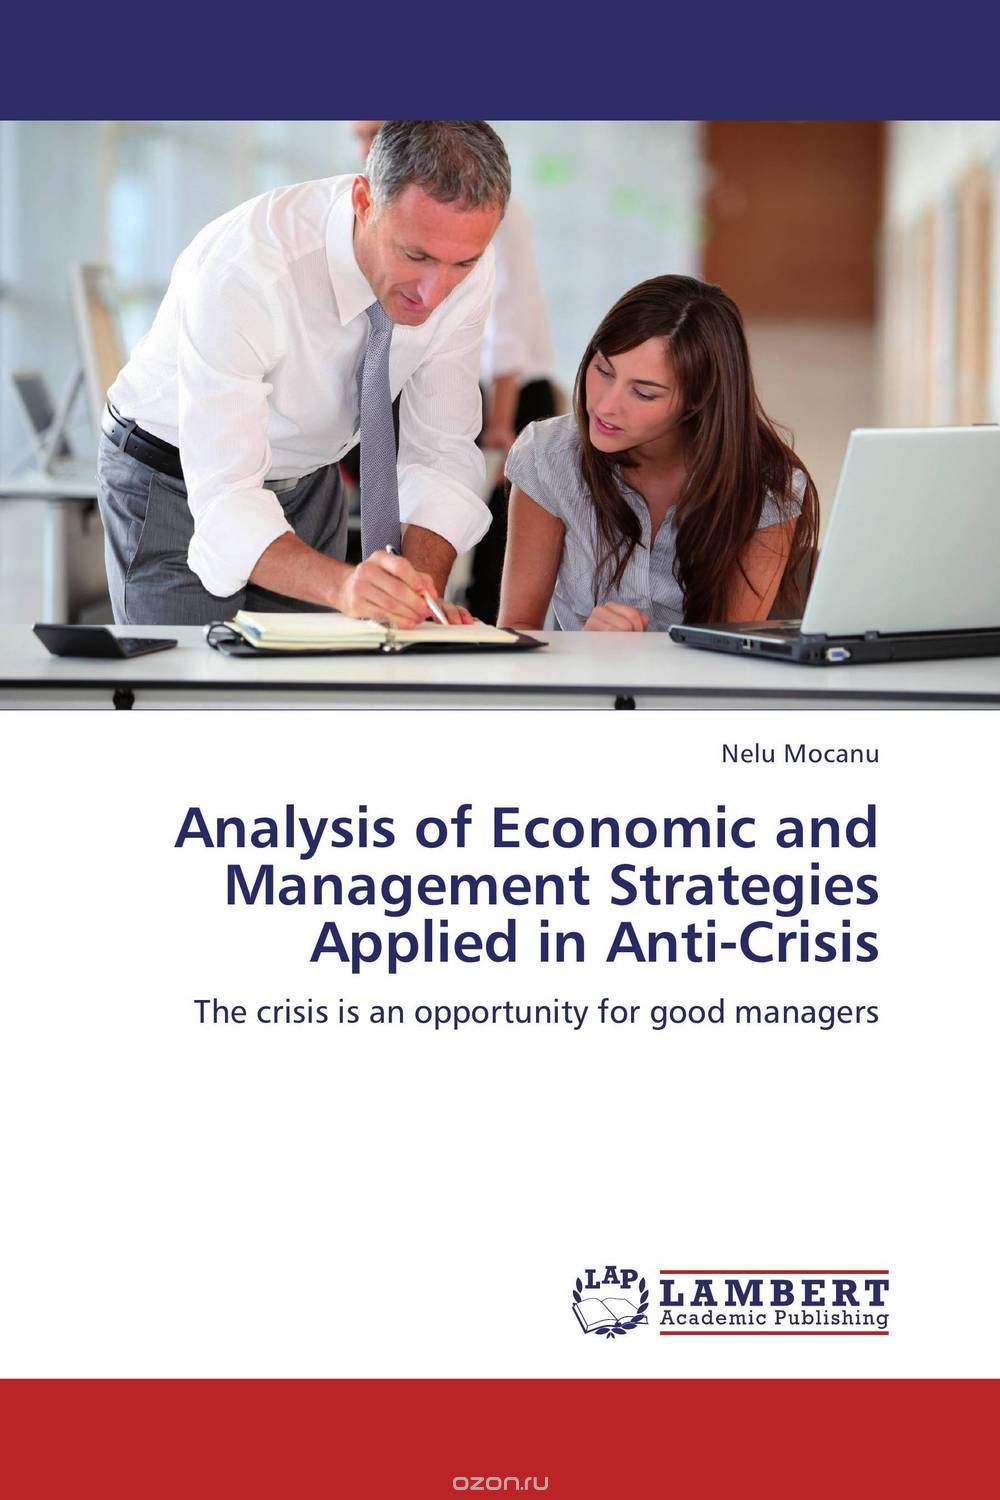 Analysis of Economic and Management Strategies Applied in Anti-Crisis